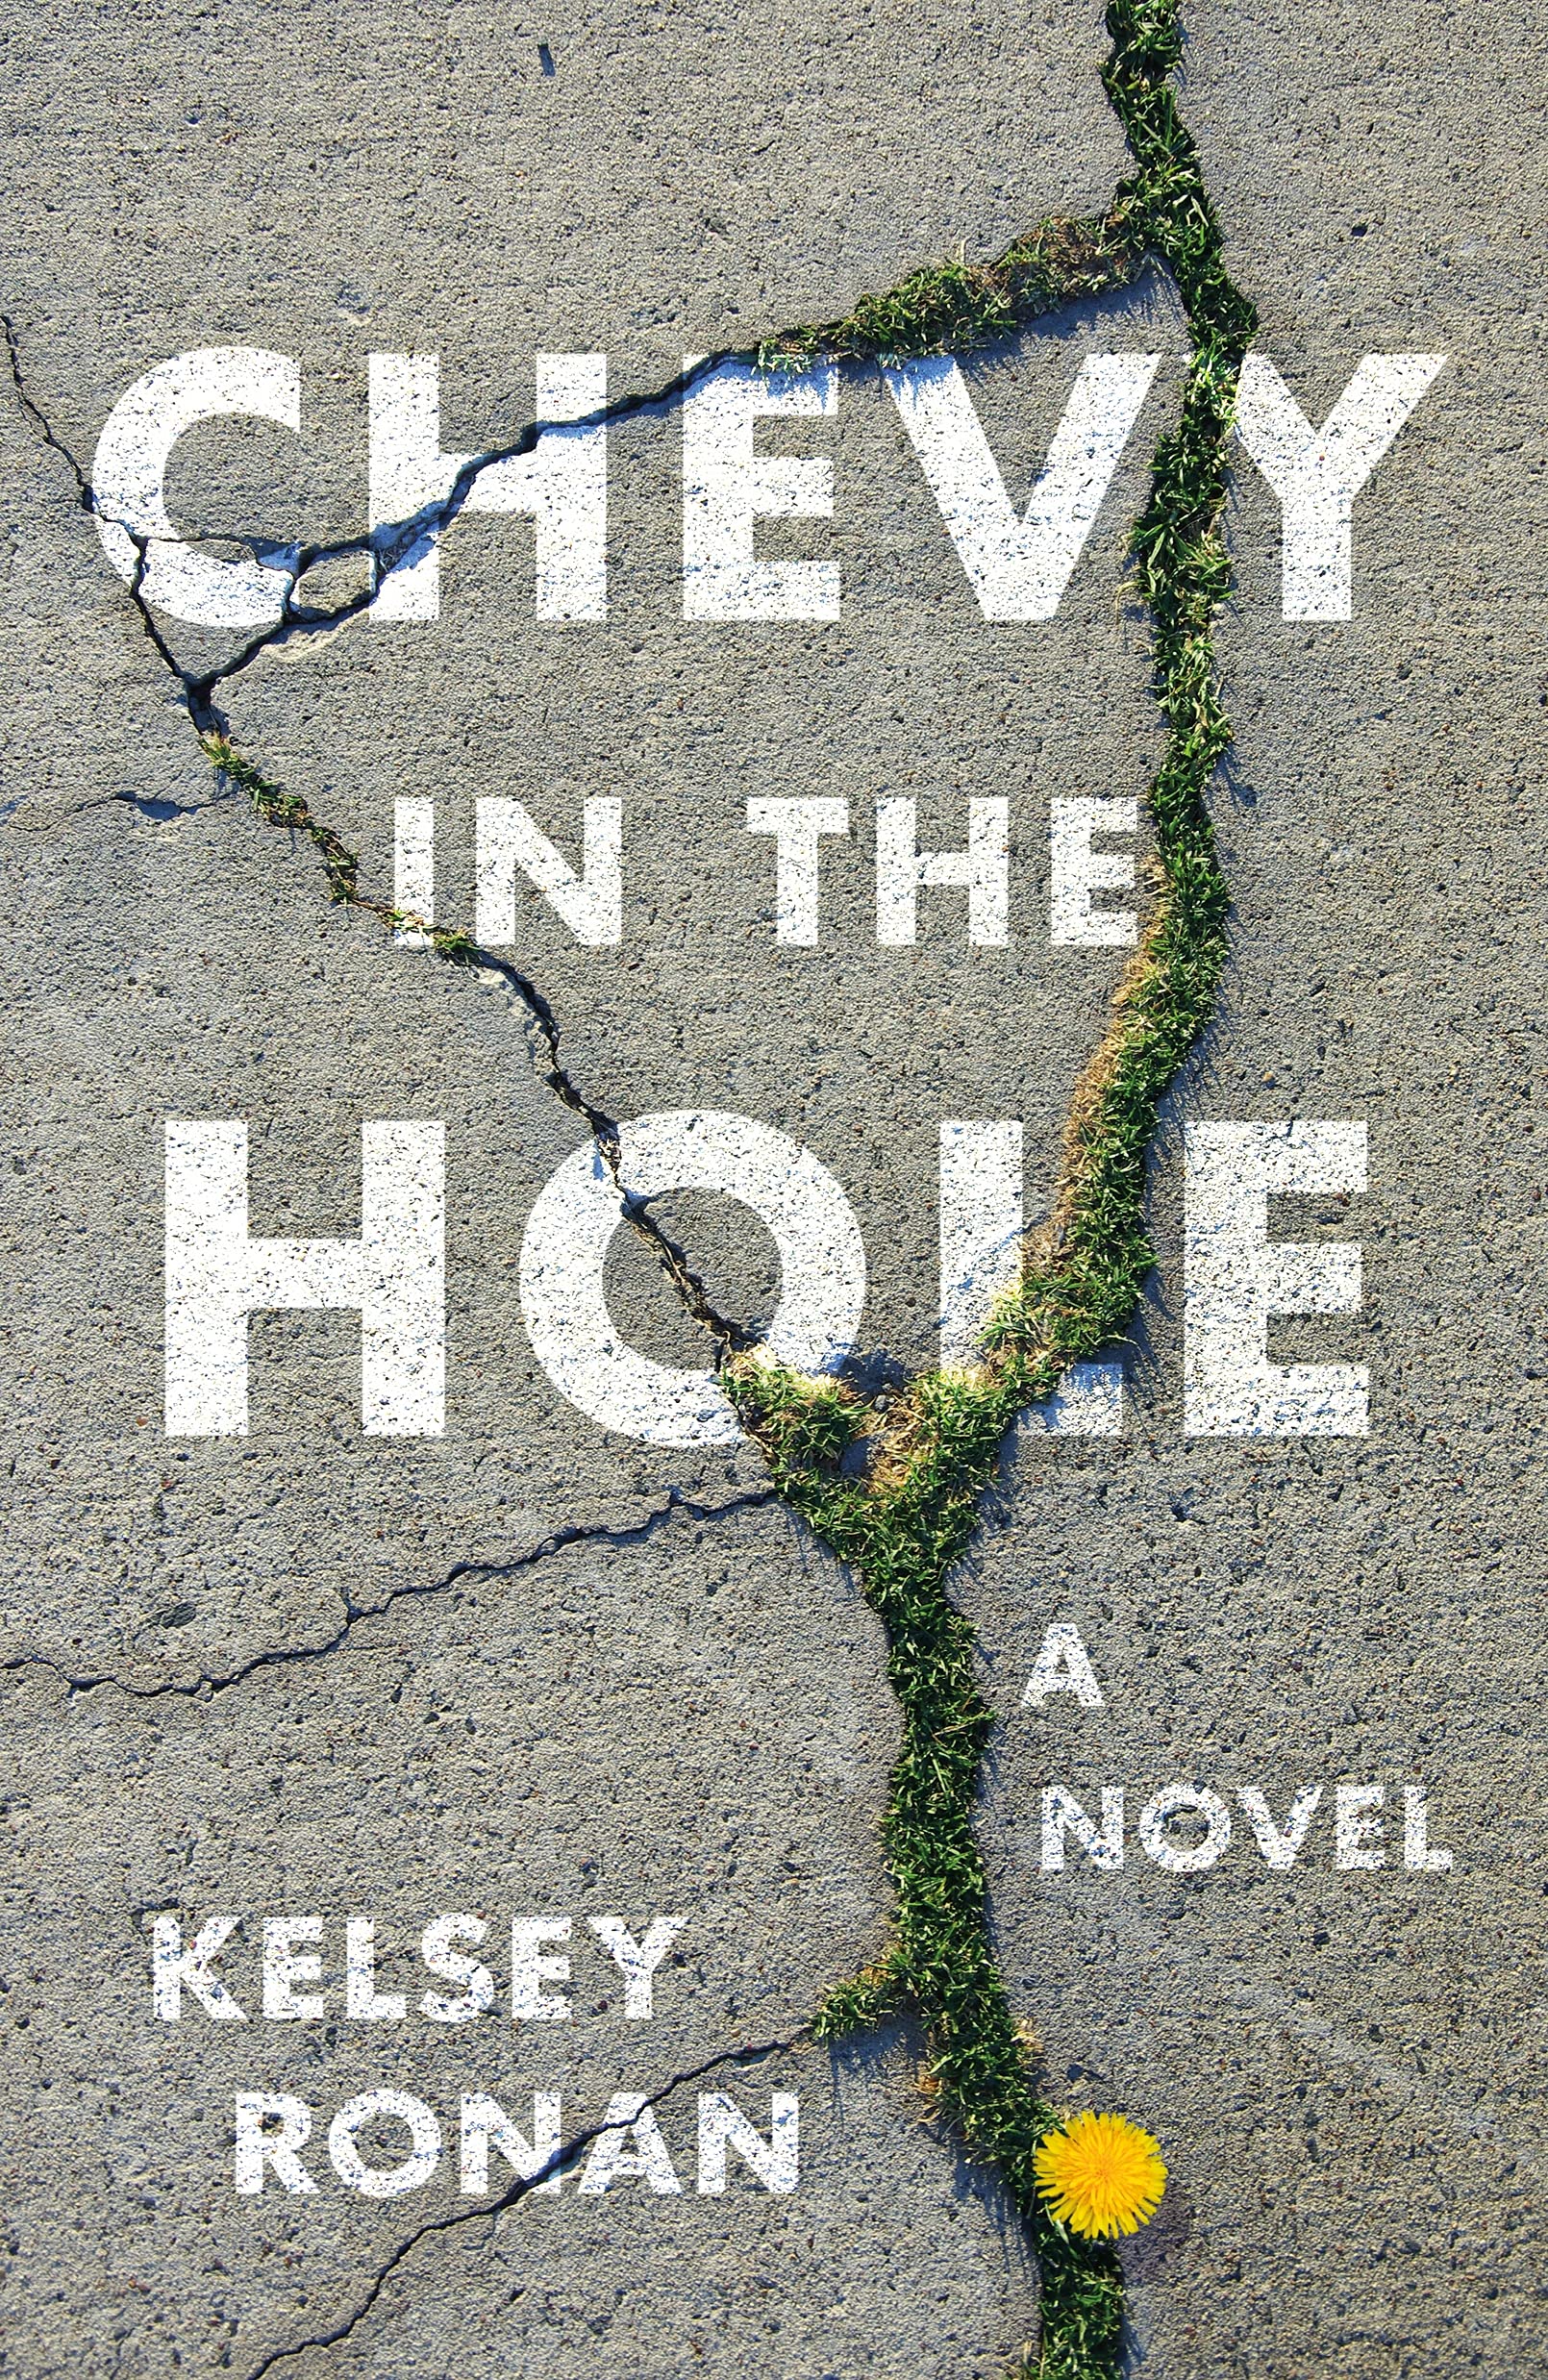 Image for "Chevy in the Hole"